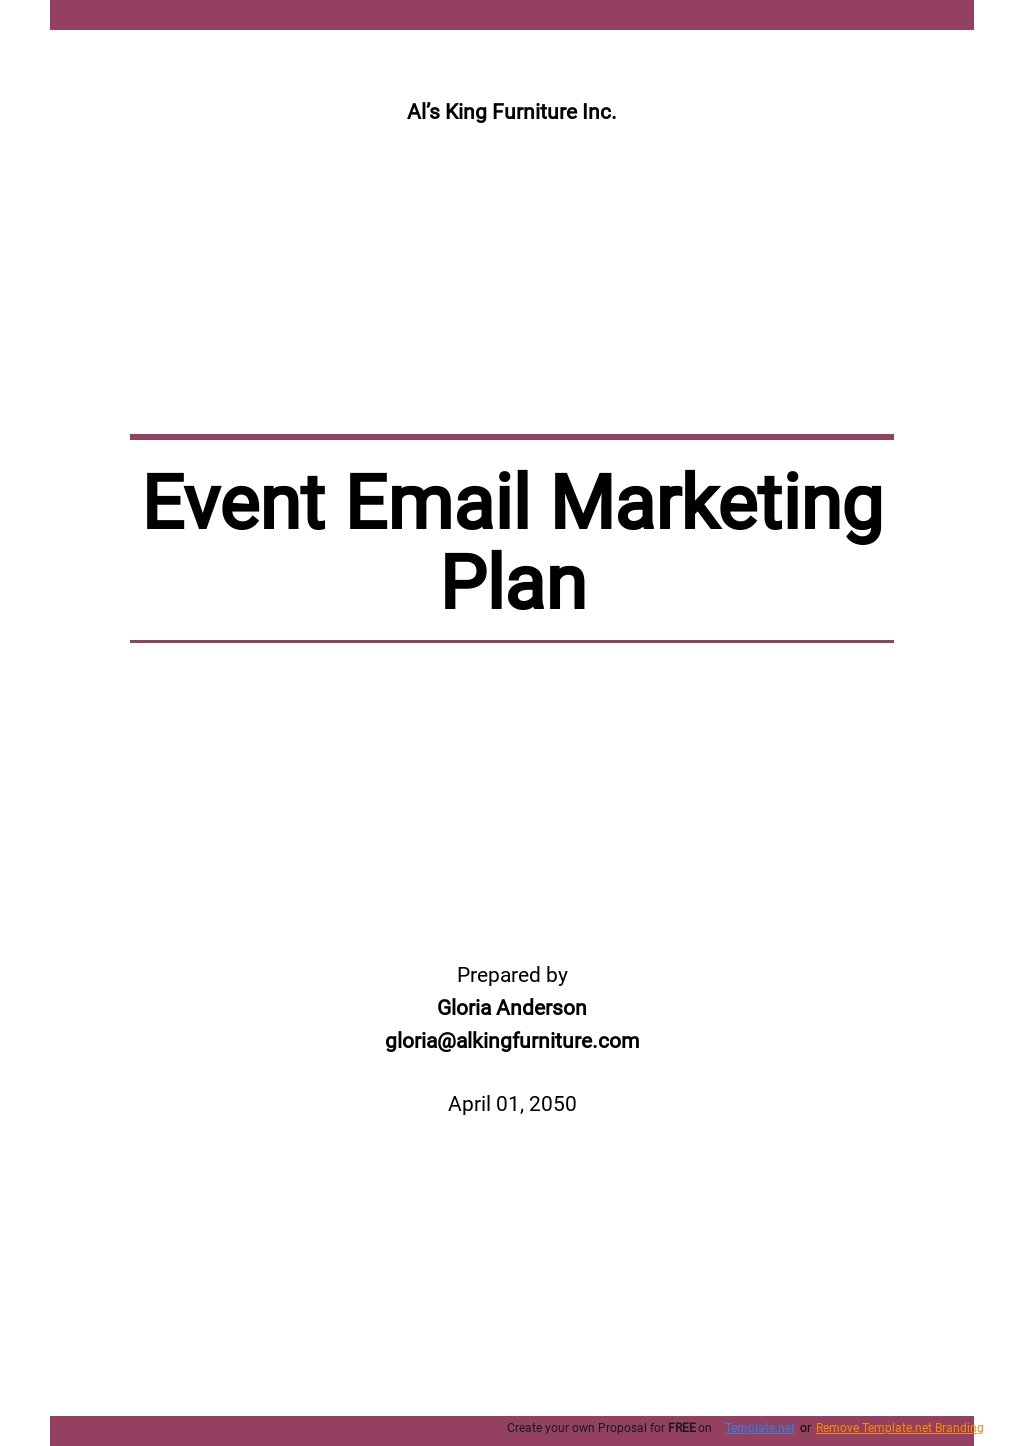 Event Email Marketing Plan Template